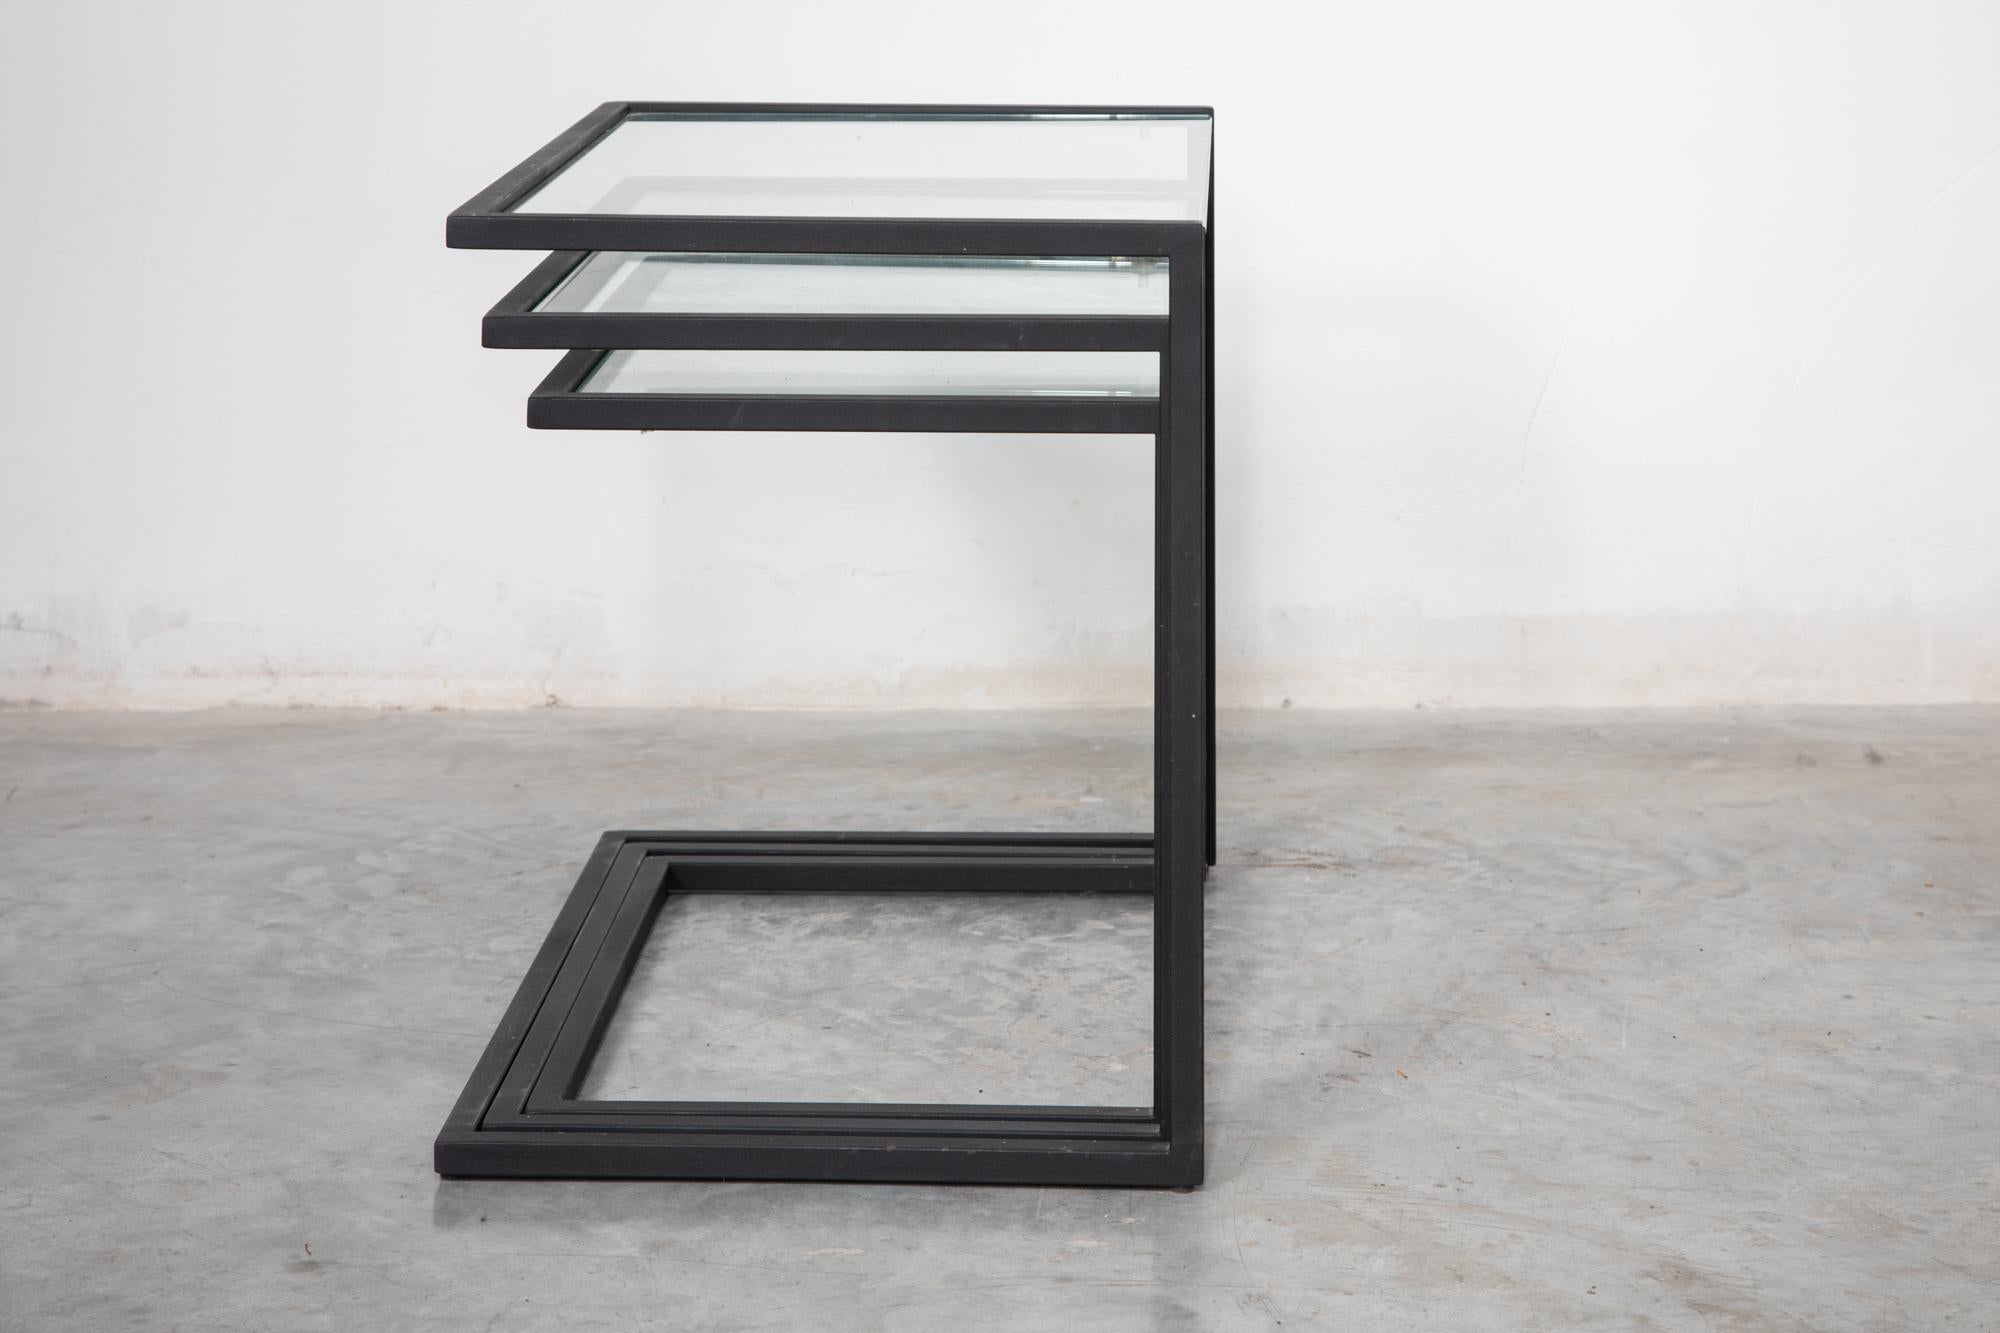 Rare Bauhaus style modernist nesting tables and clear glass top the frames are made of black lacquered metal.
The tables are in good original condition.